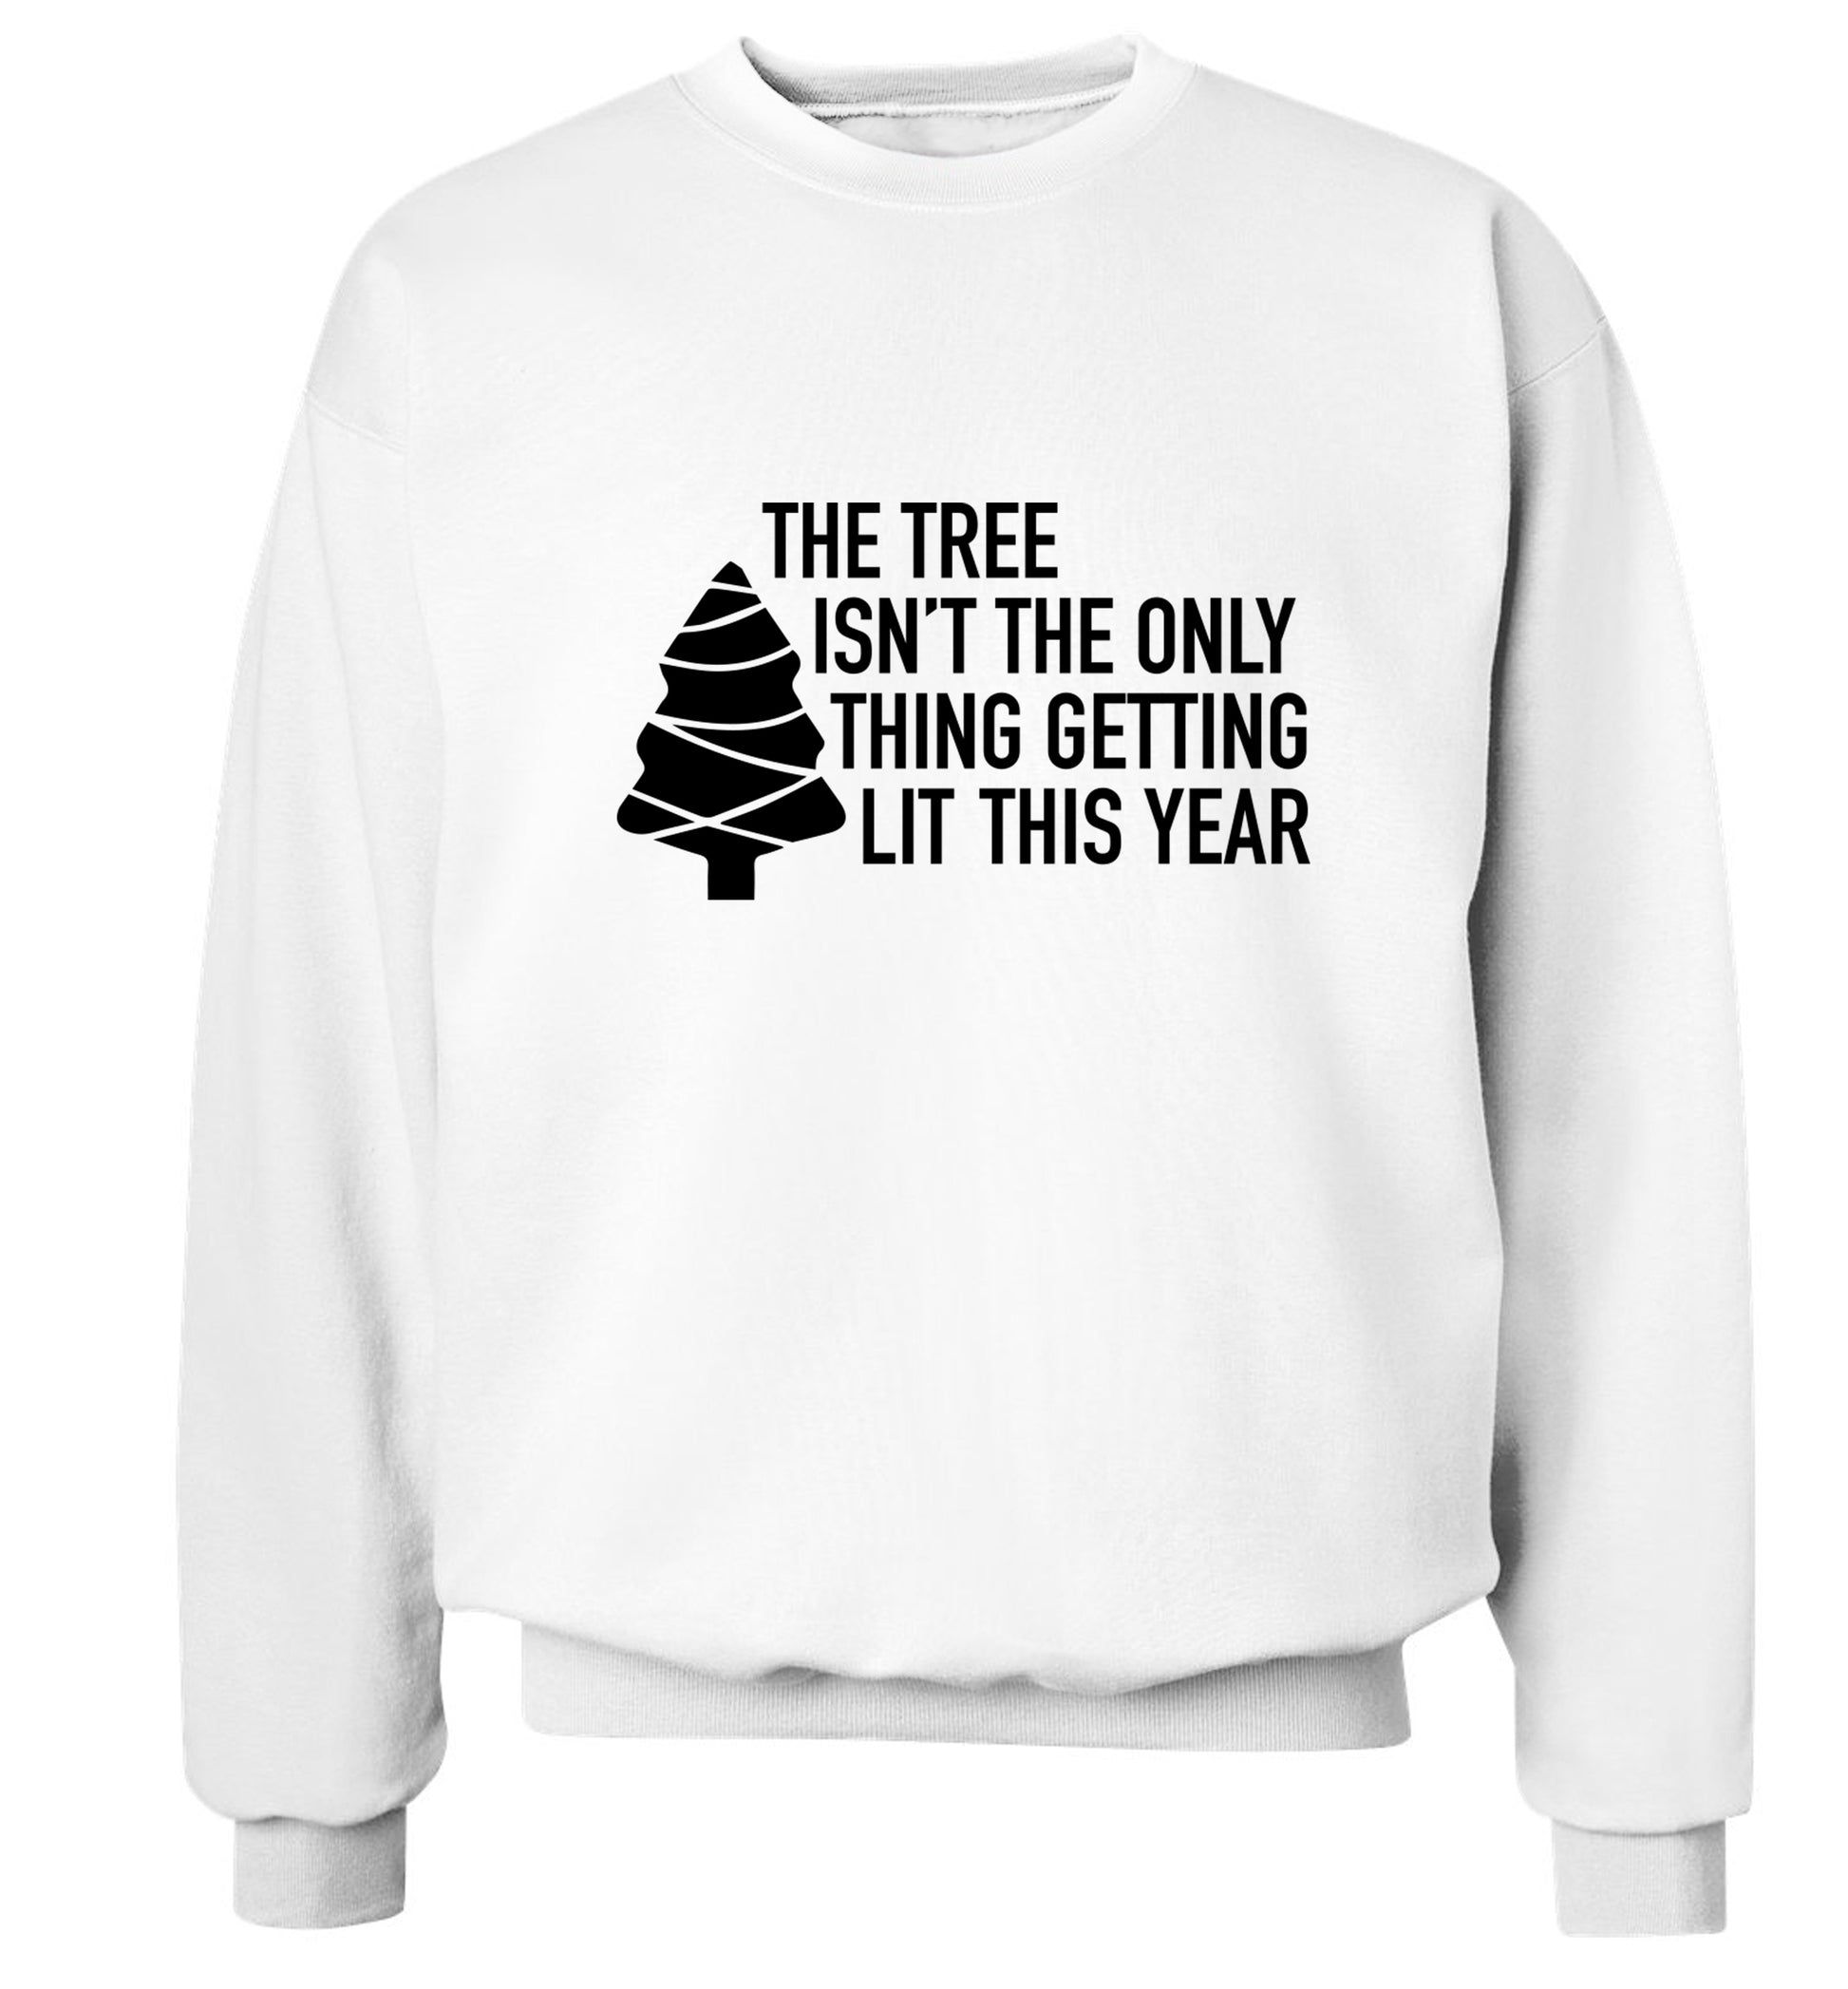 The tree isn't the only thing getting lit this year Adult's unisex white Sweater 2XL